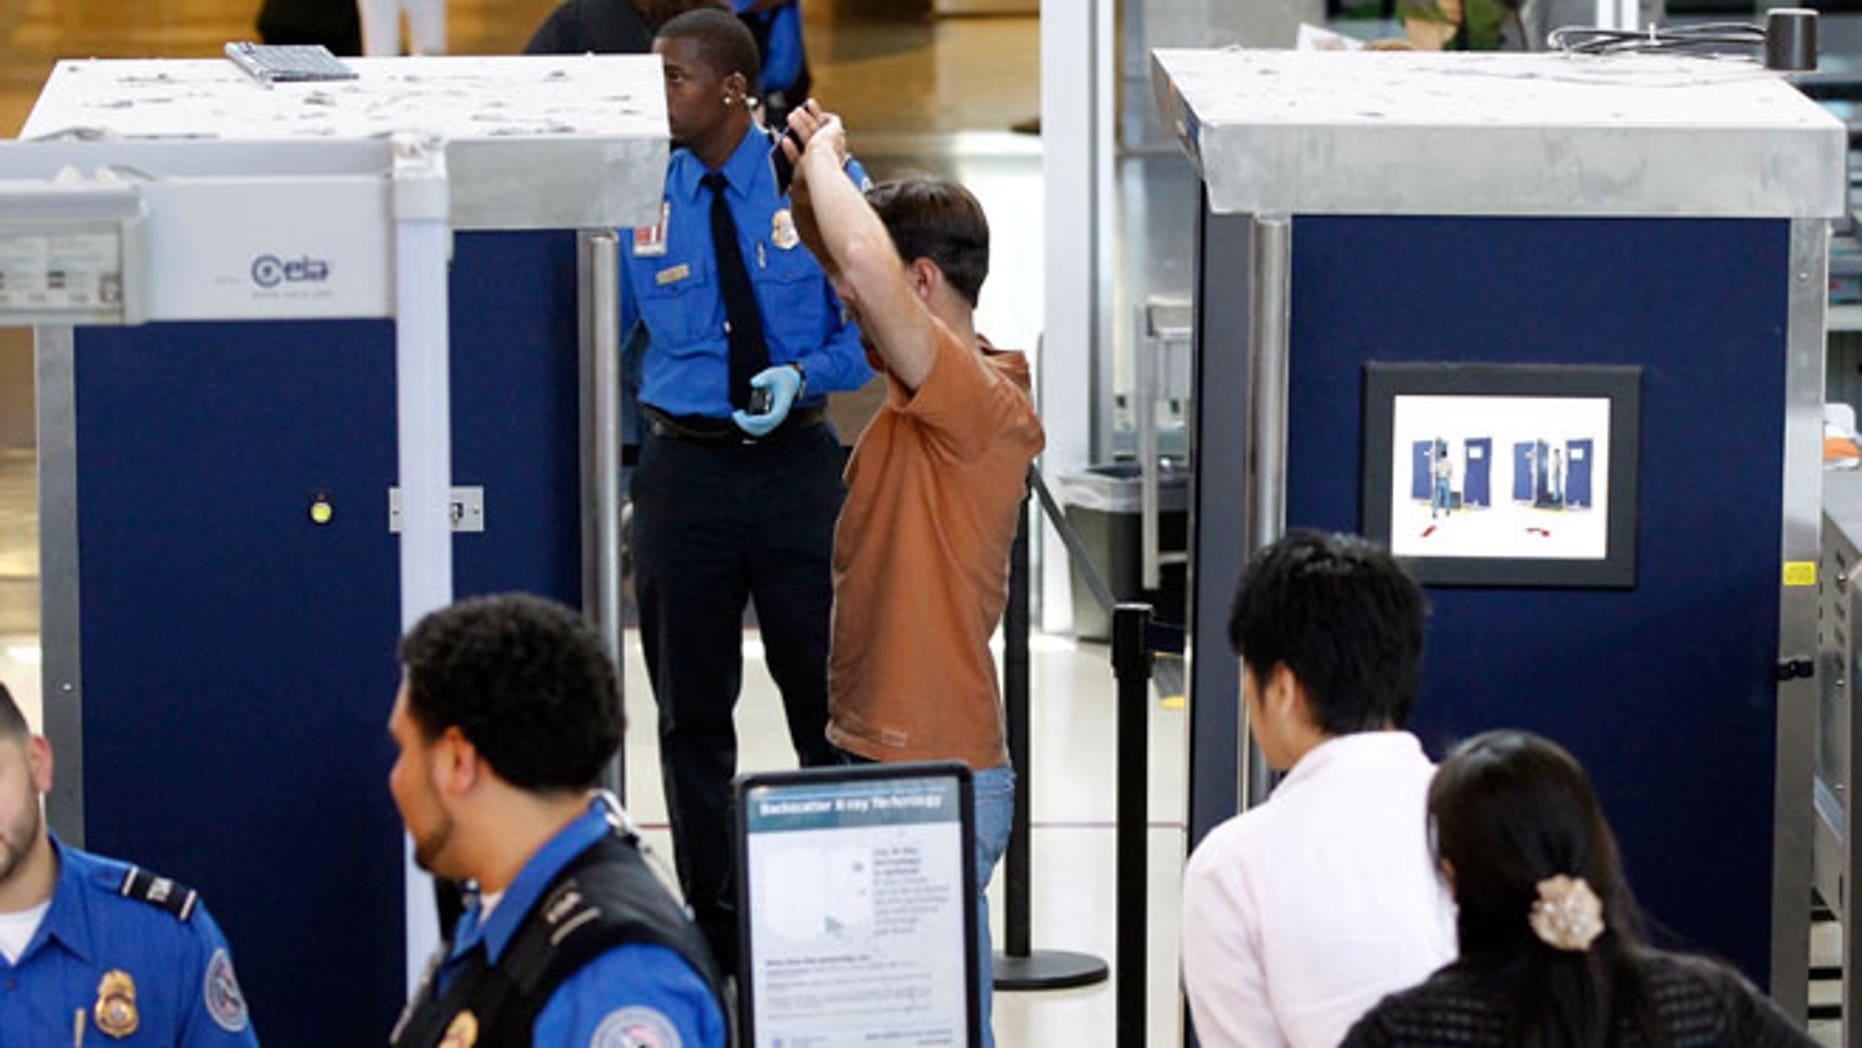 Tsa Agent Arrested For Allegedly Stealing 5000 From Passengers Jacket Fox News